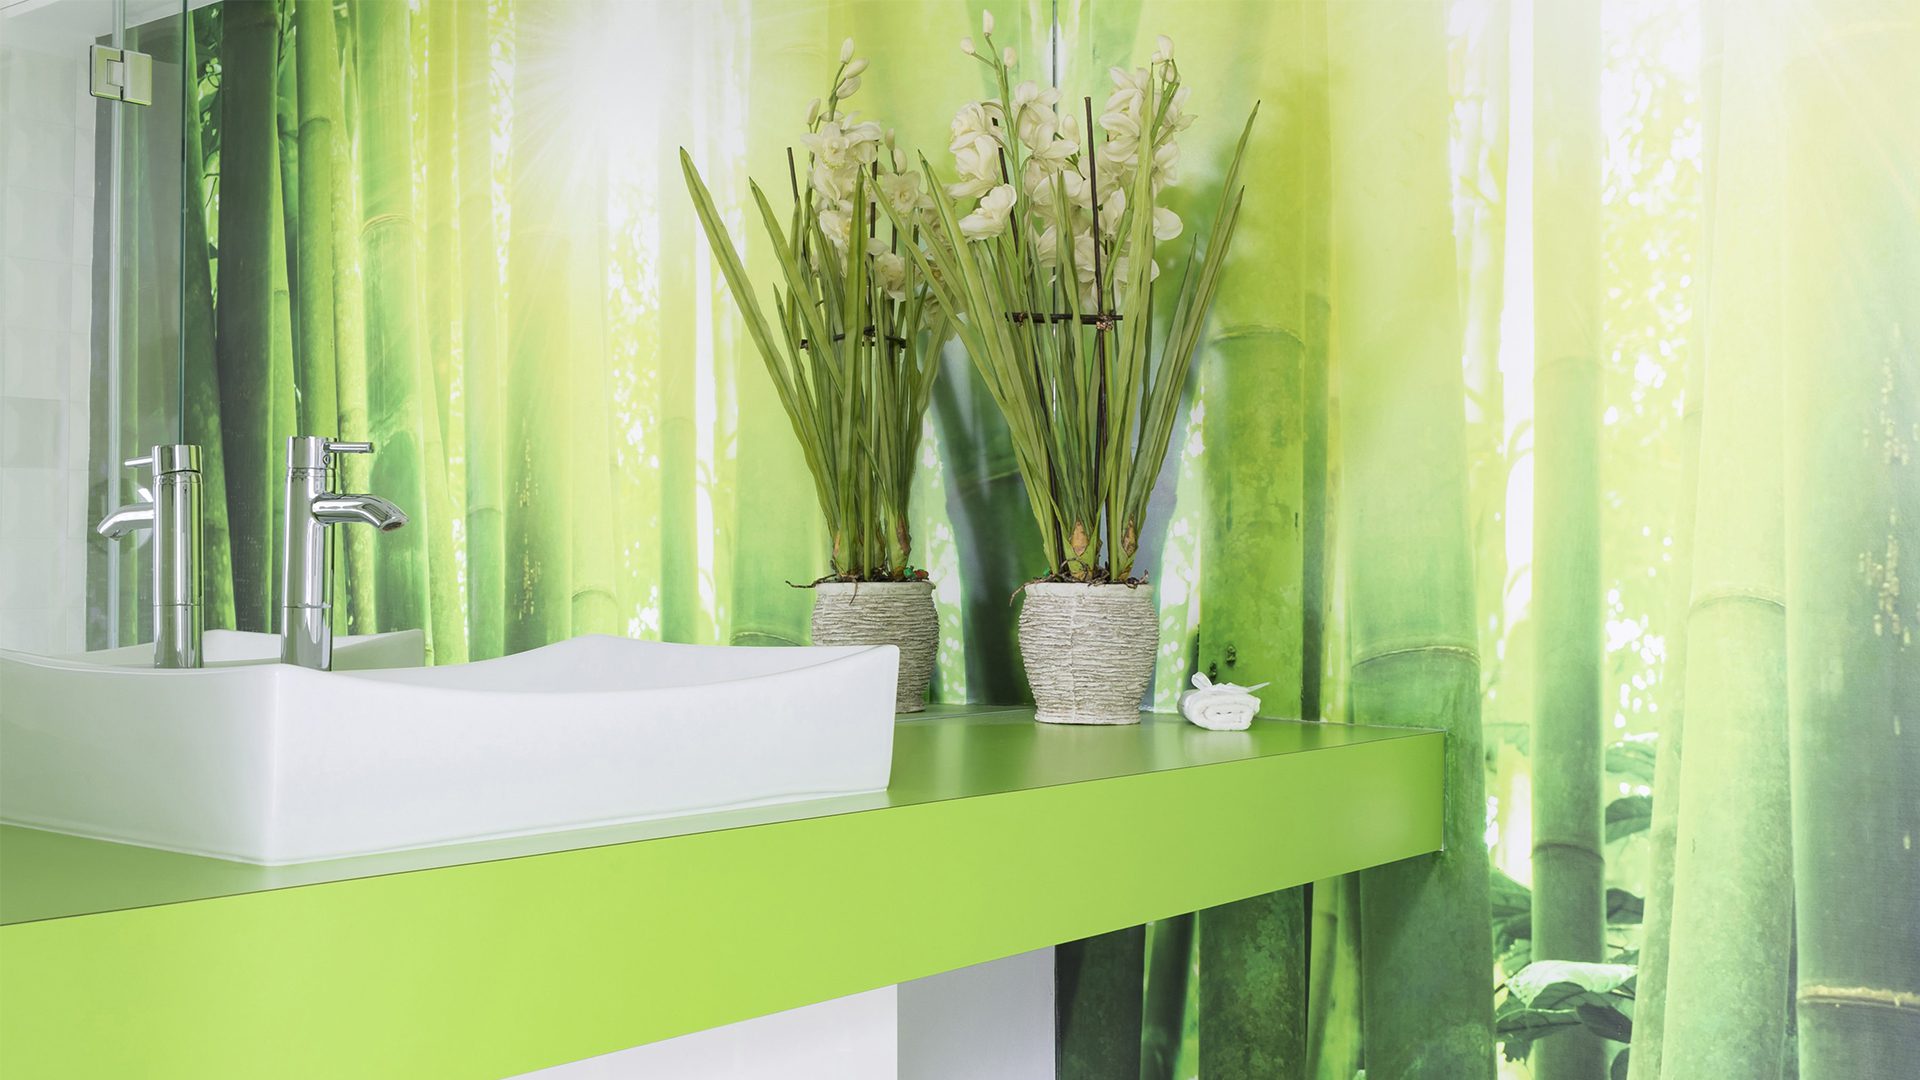 Full wall printed glass splashback with image of green bamboo by Artform Collective.